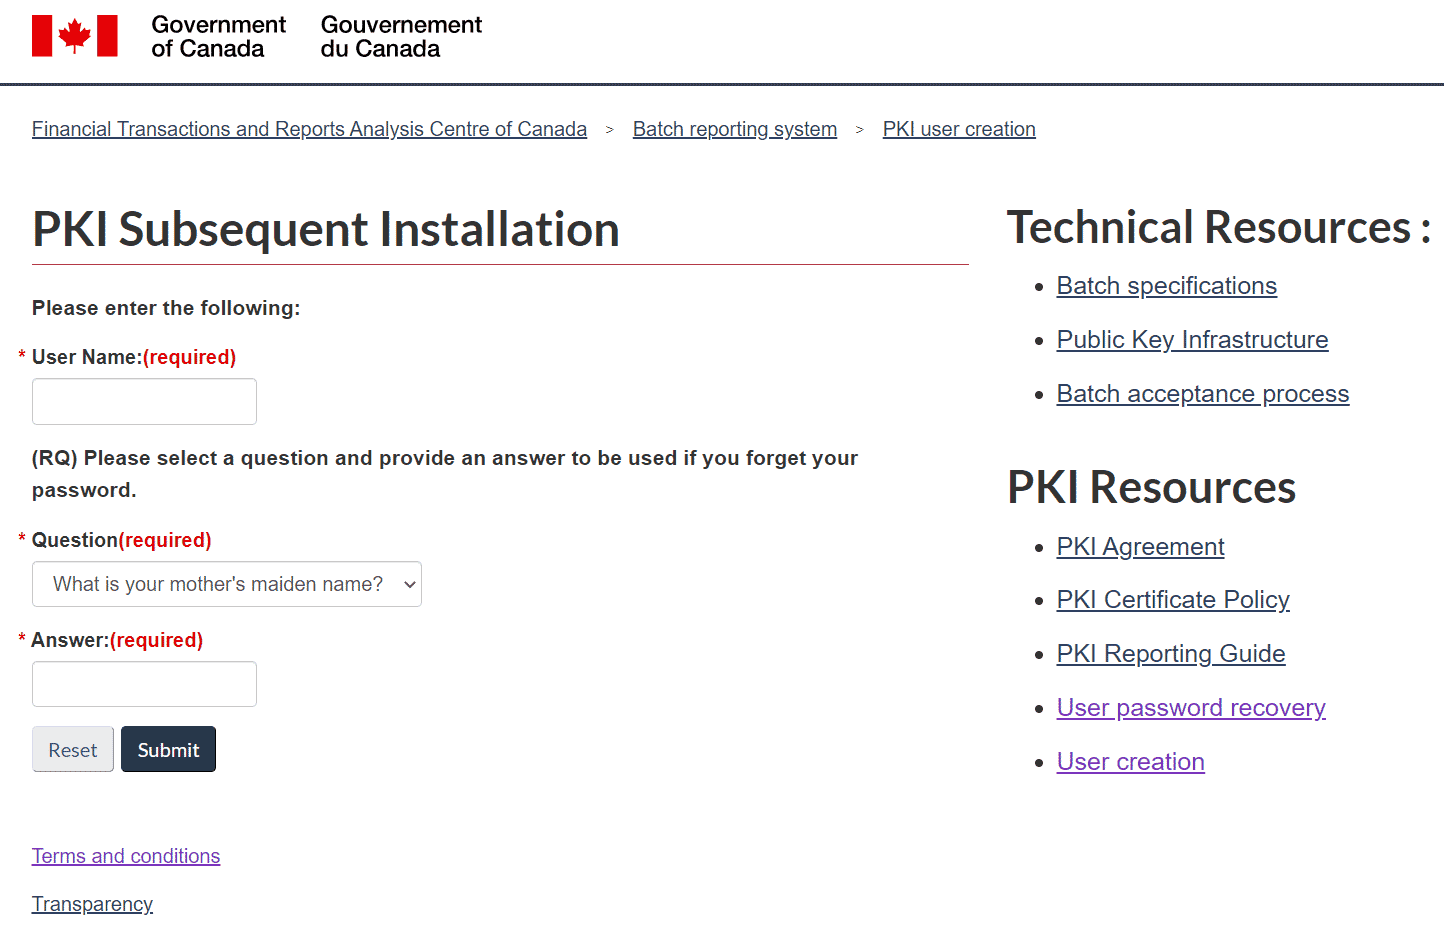 PKI Subsequent Installation form with the following required fields: User Name, Question and Answer 